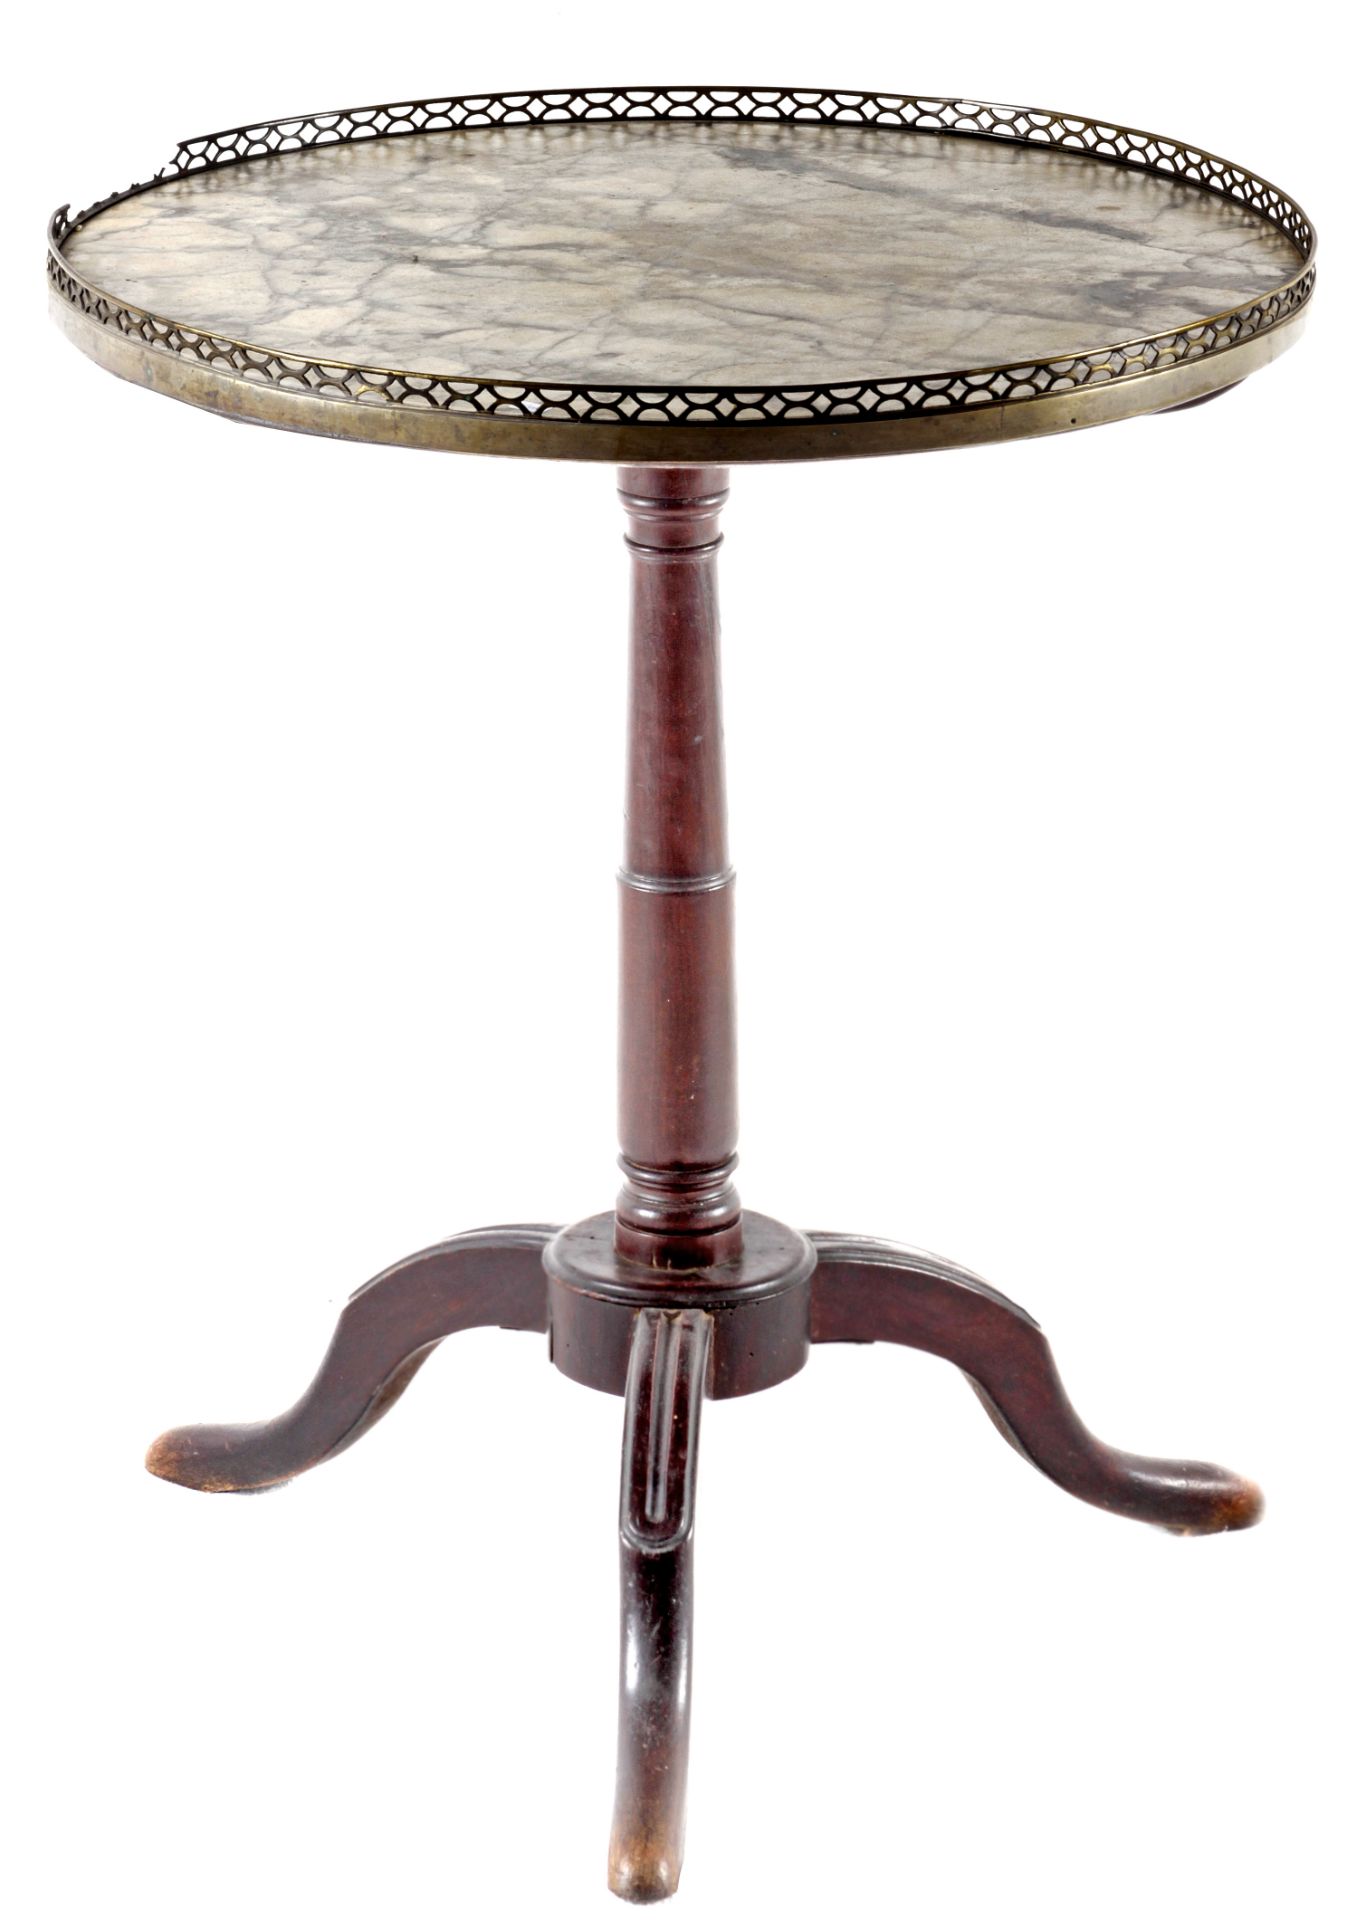 A 19th century French gueridon table